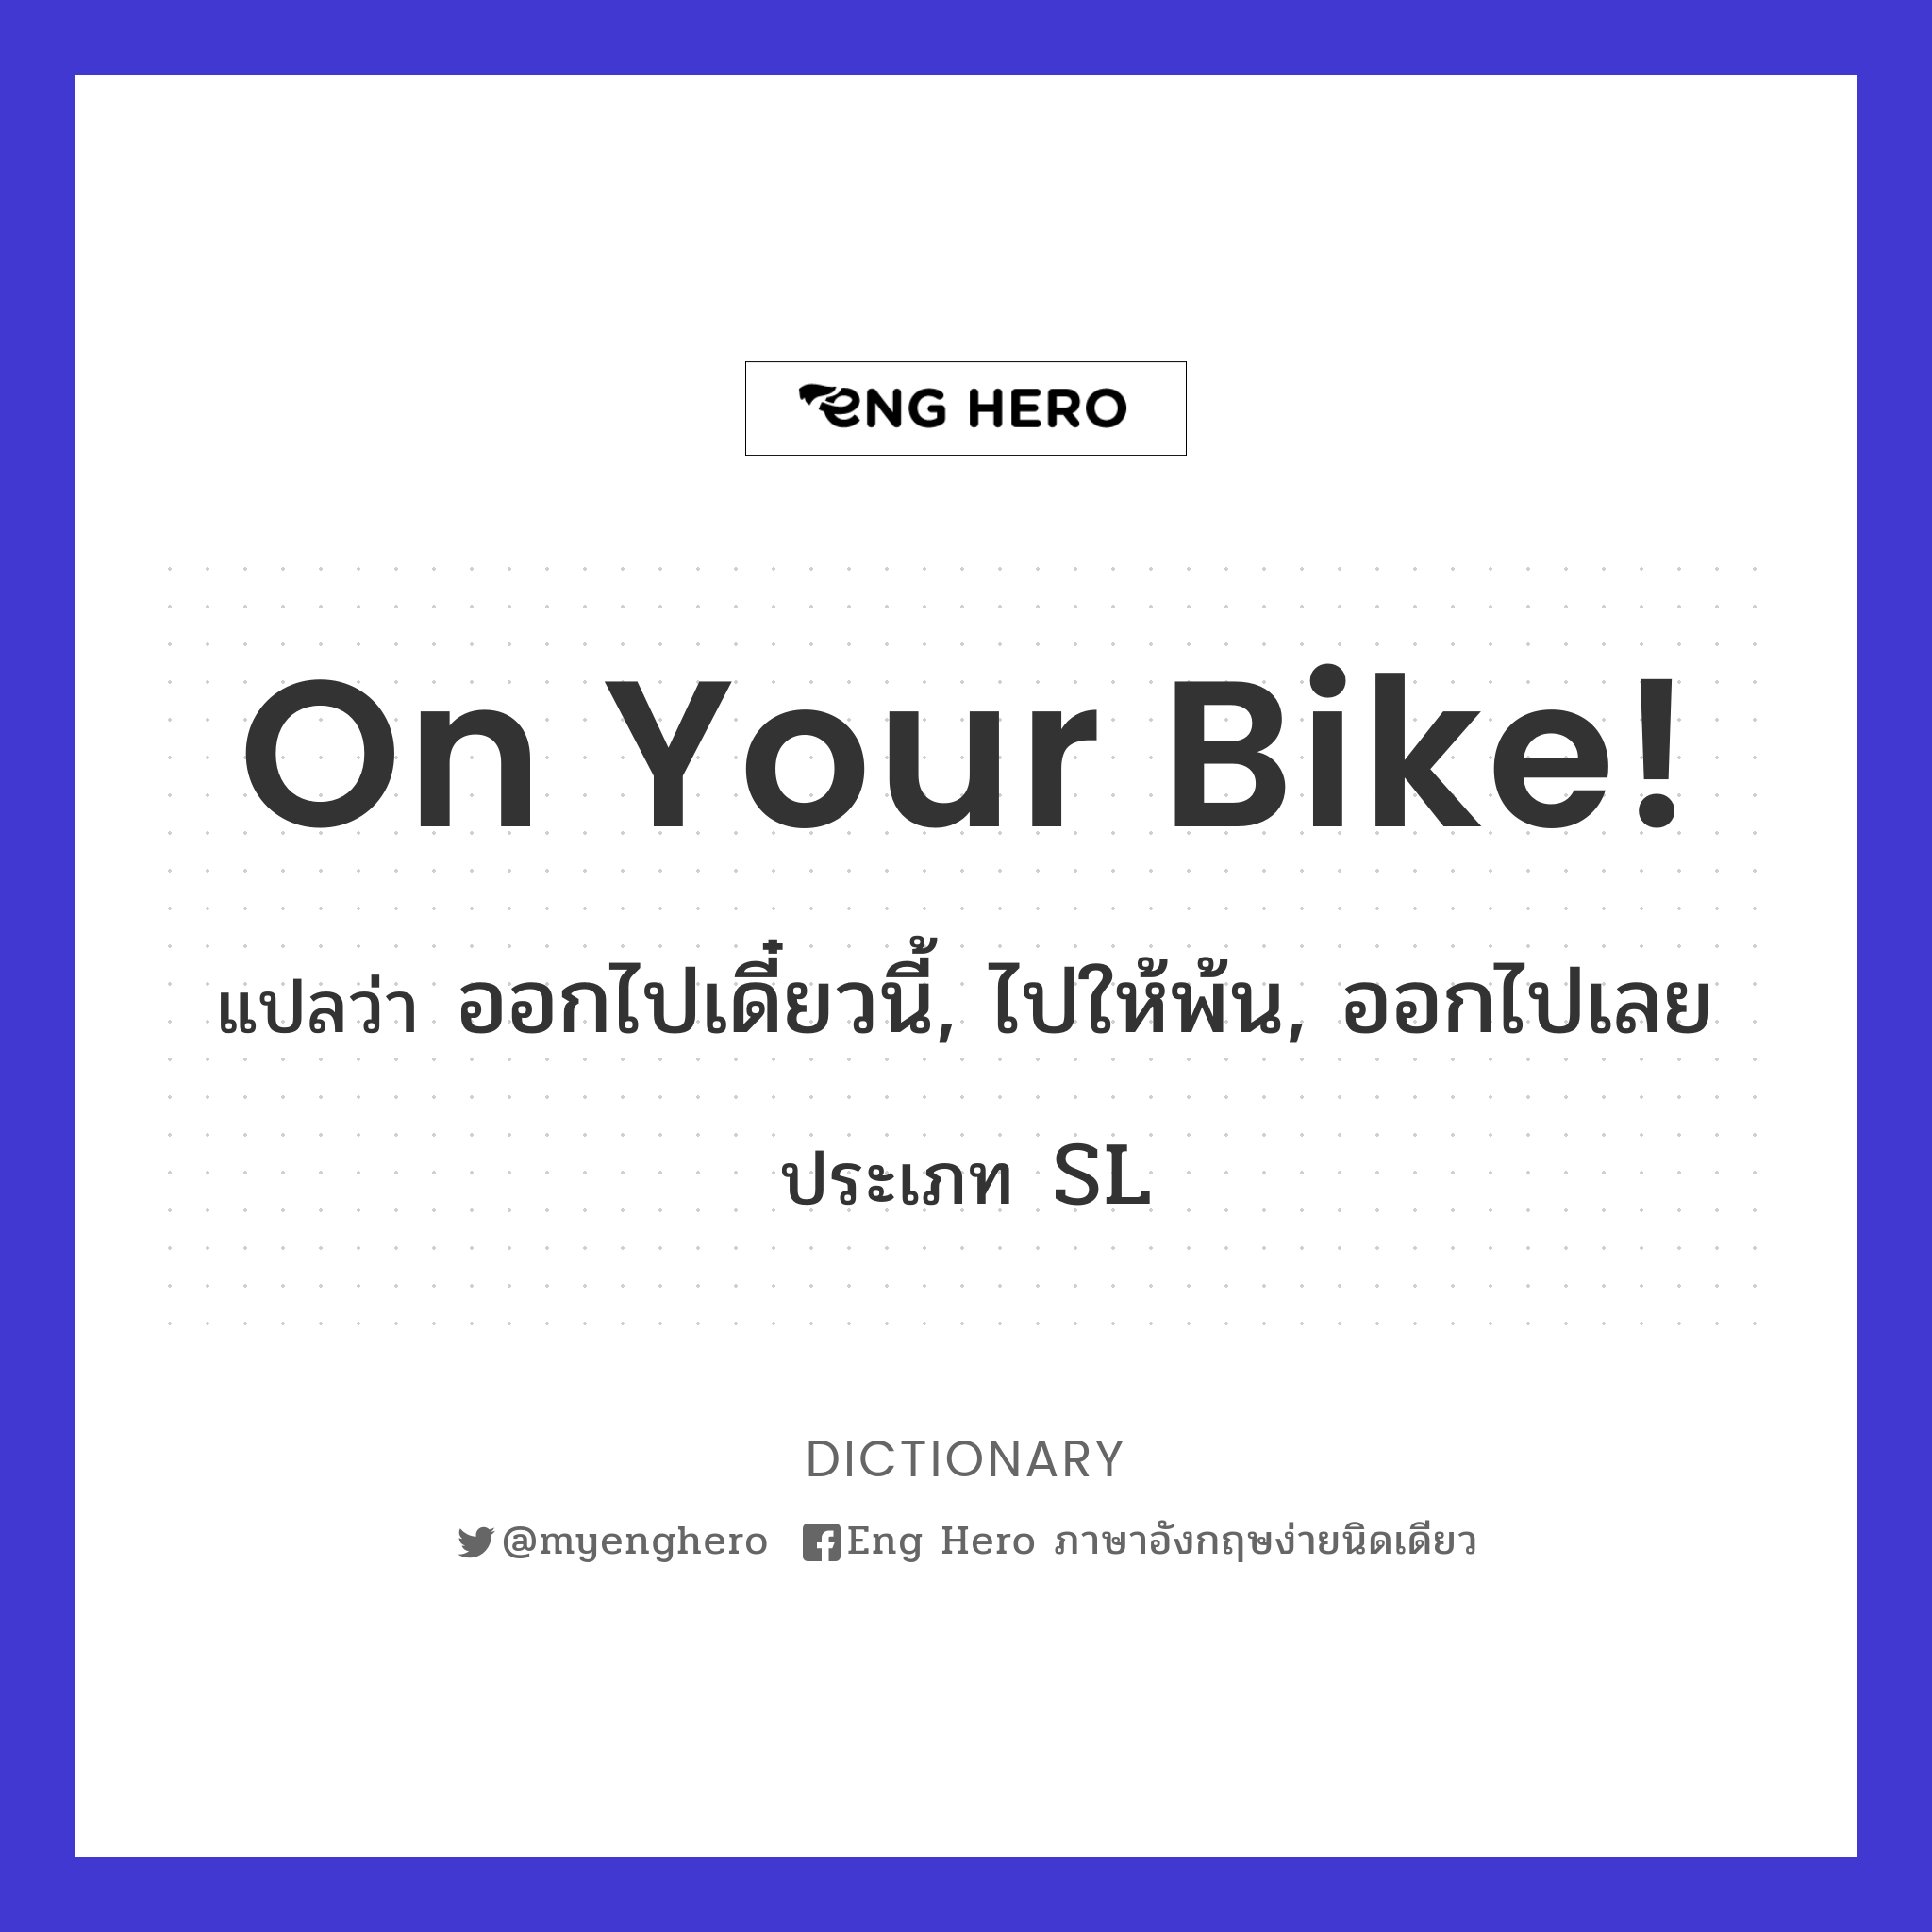 On your bike!